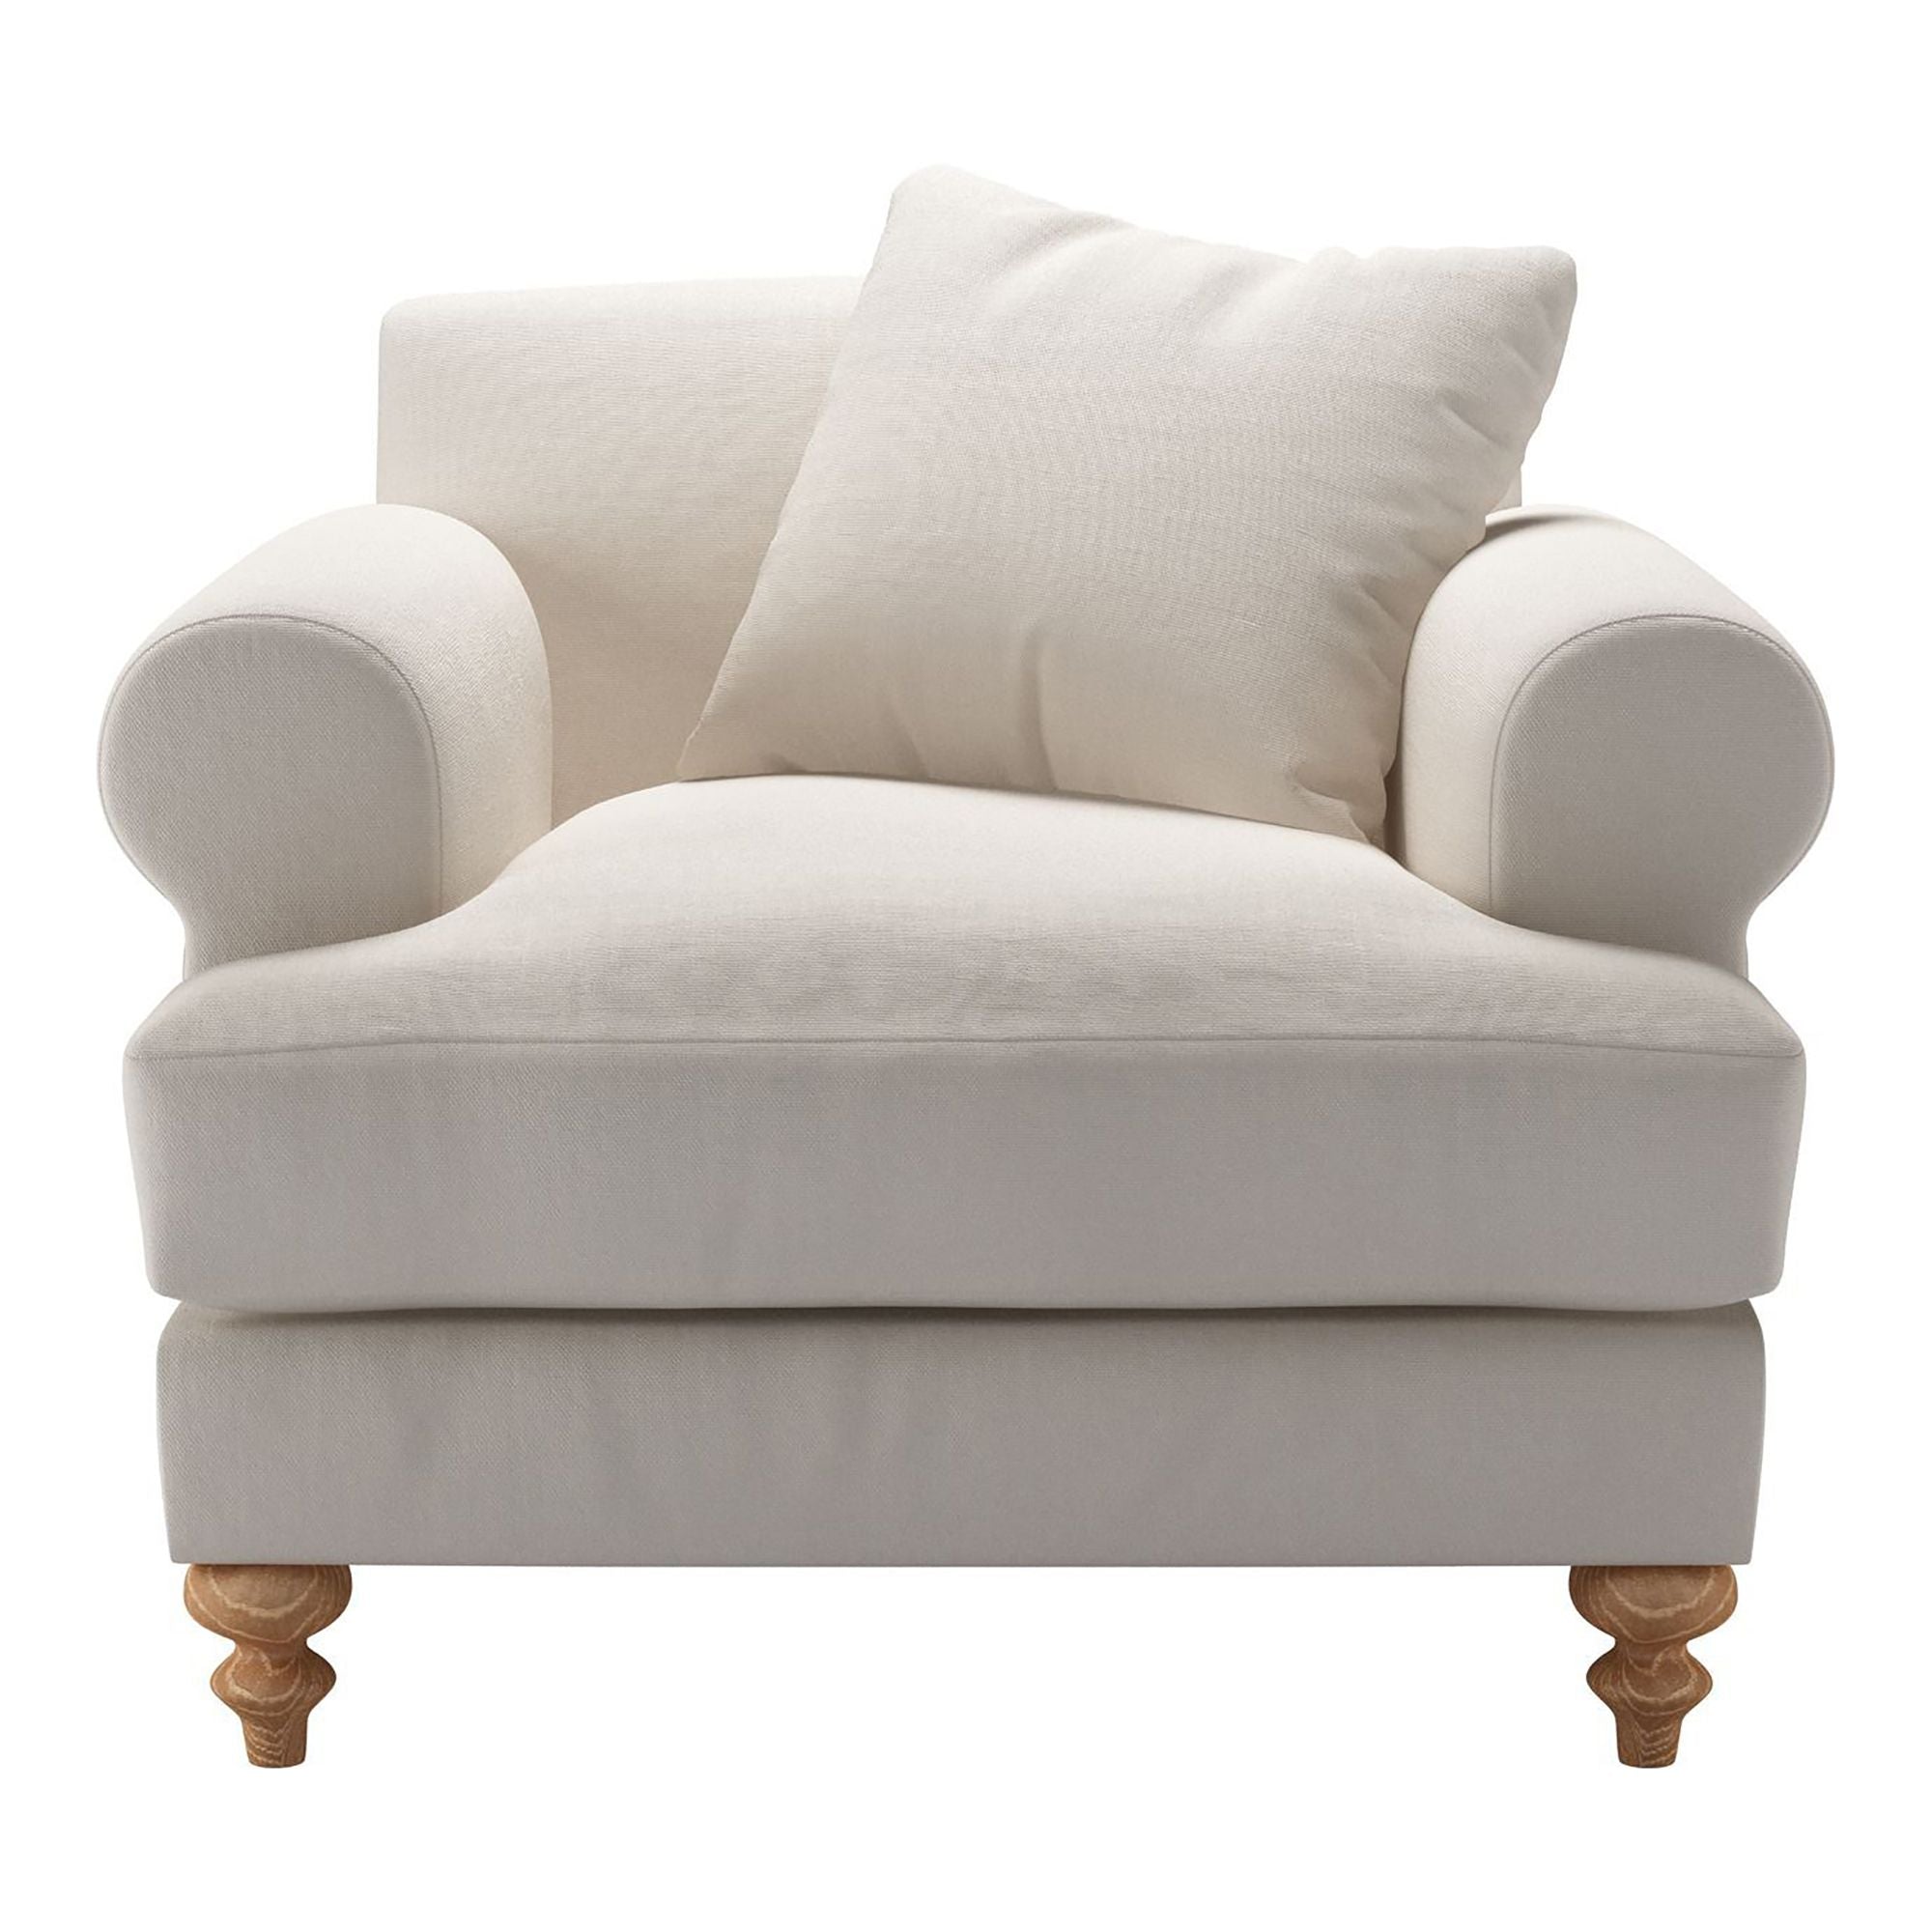 Teddy Brushed Linen Cotton Armchair